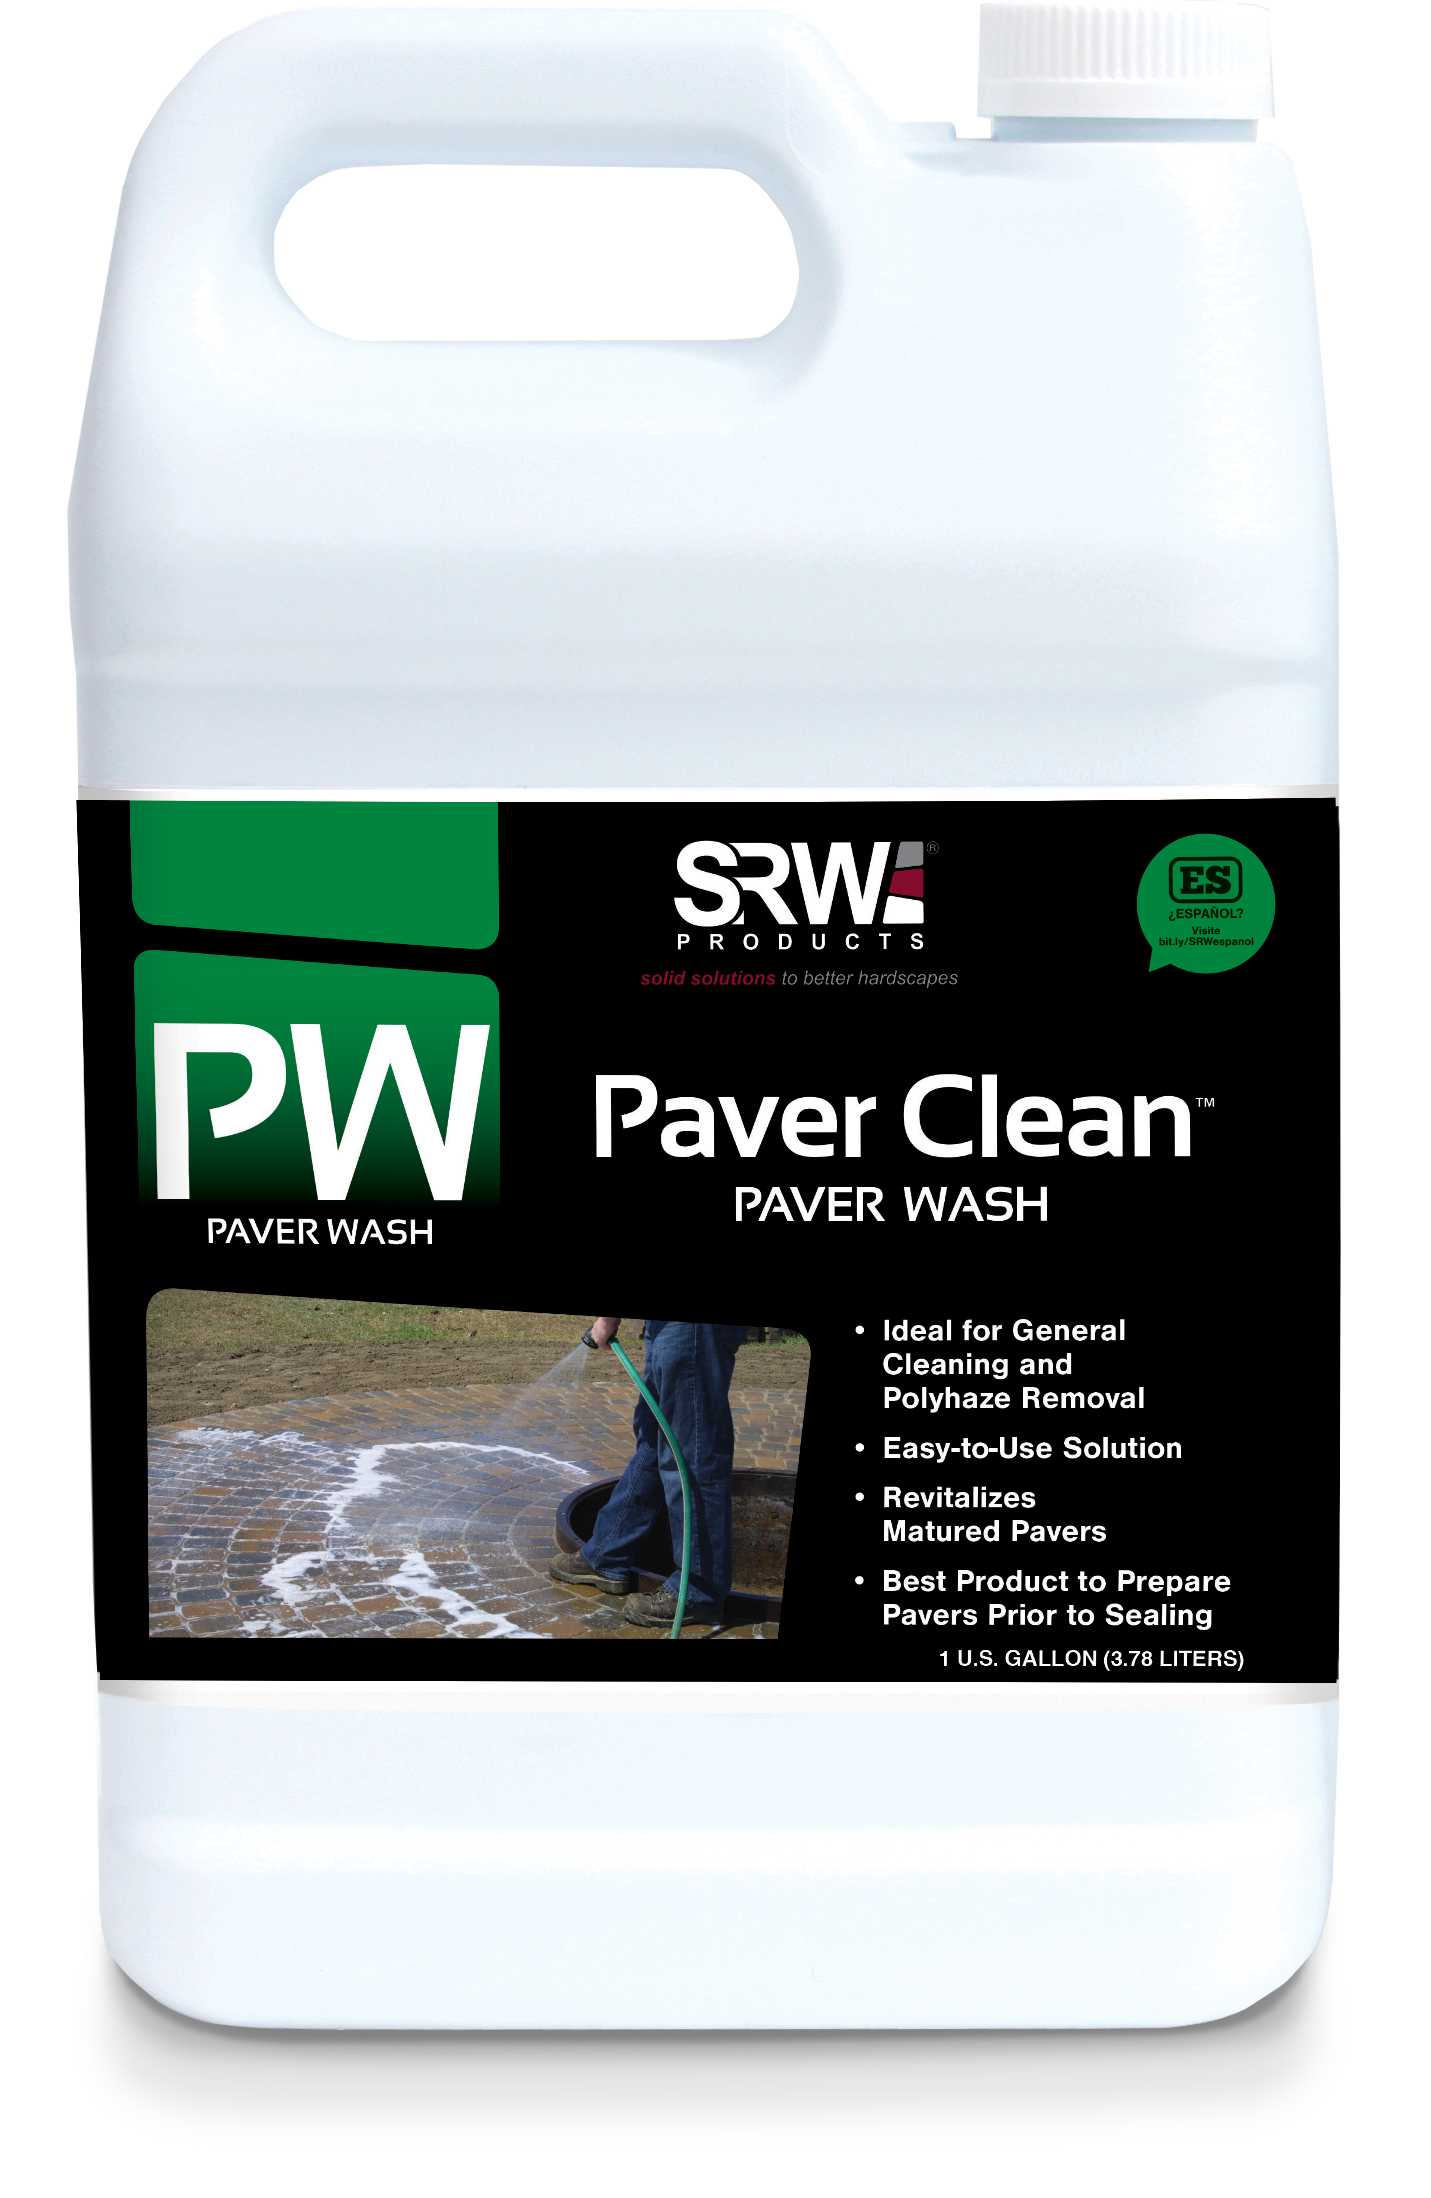 Container of Paver Wash